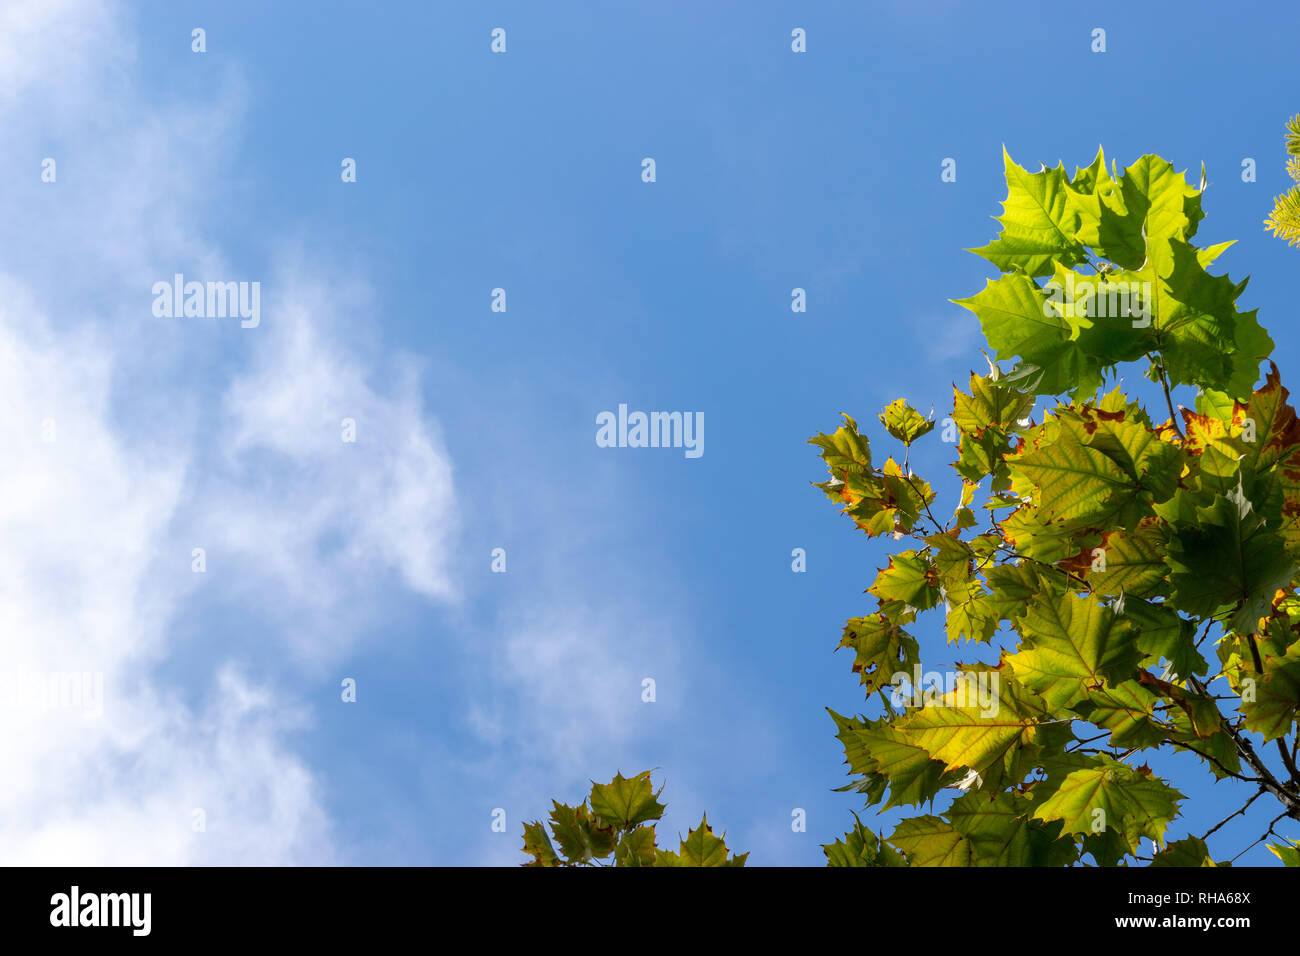 Isolated green maple leaves against bright blue sky with patch of clouds. Fall/ Autumn season. Stock Photo